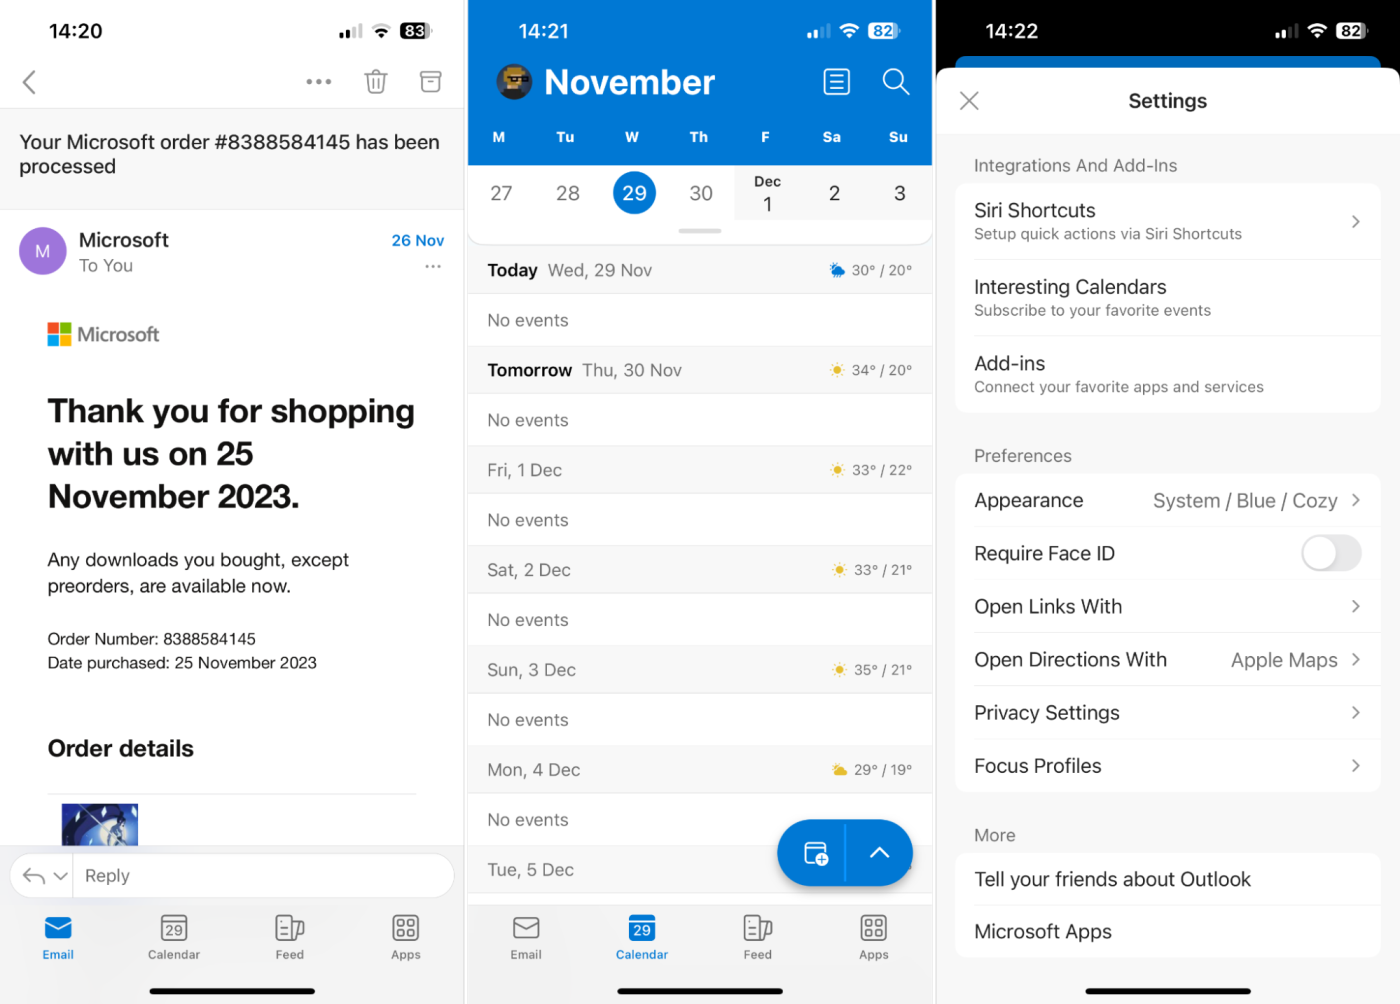 Outlook, our pick for the best iPhone productivity app for email